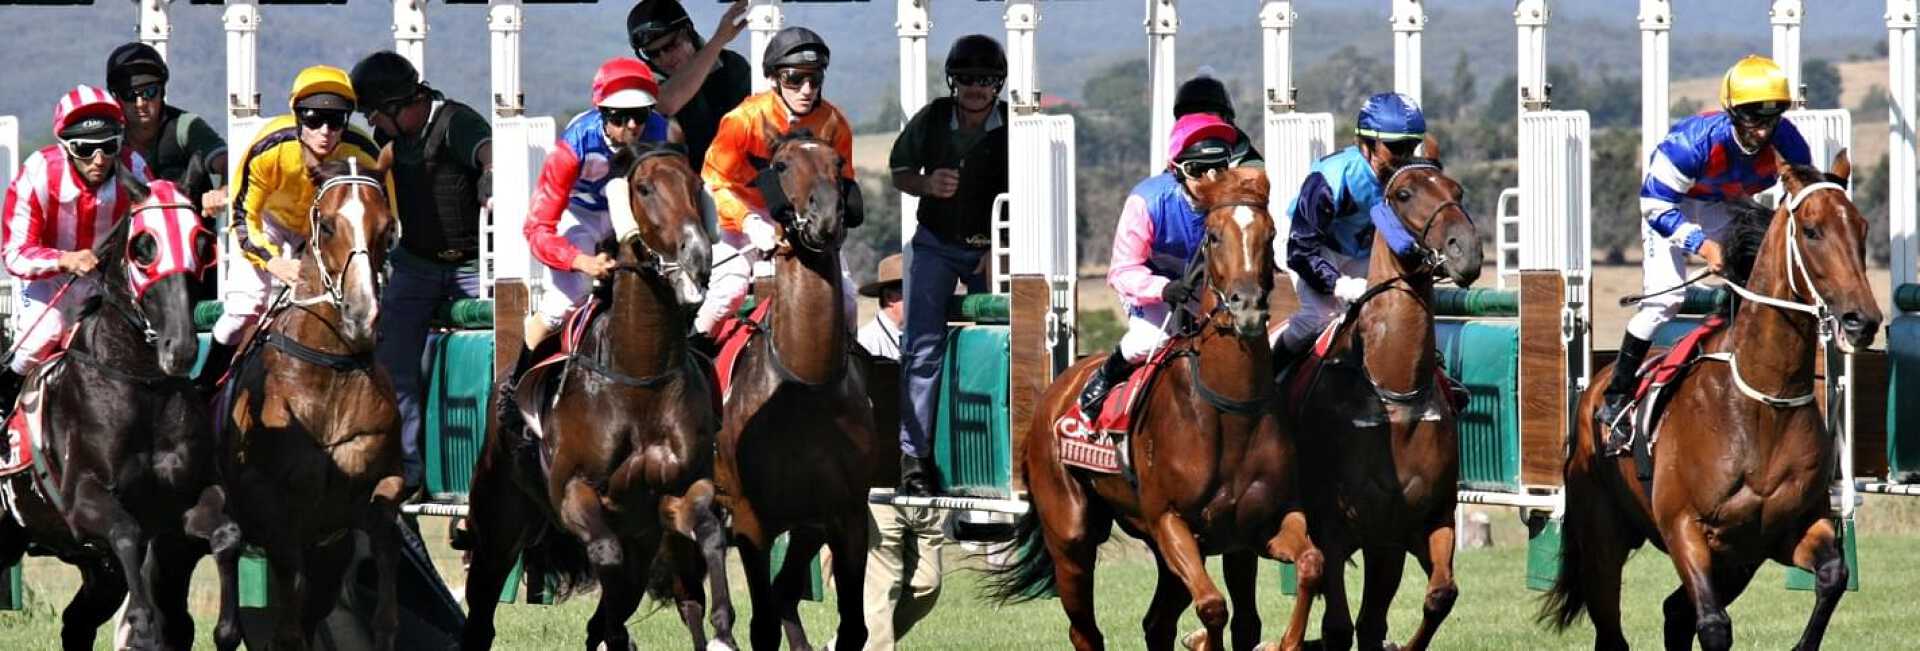 Seven jockeys on their respective horses at the beginning of the Melbourne Cup horse racing